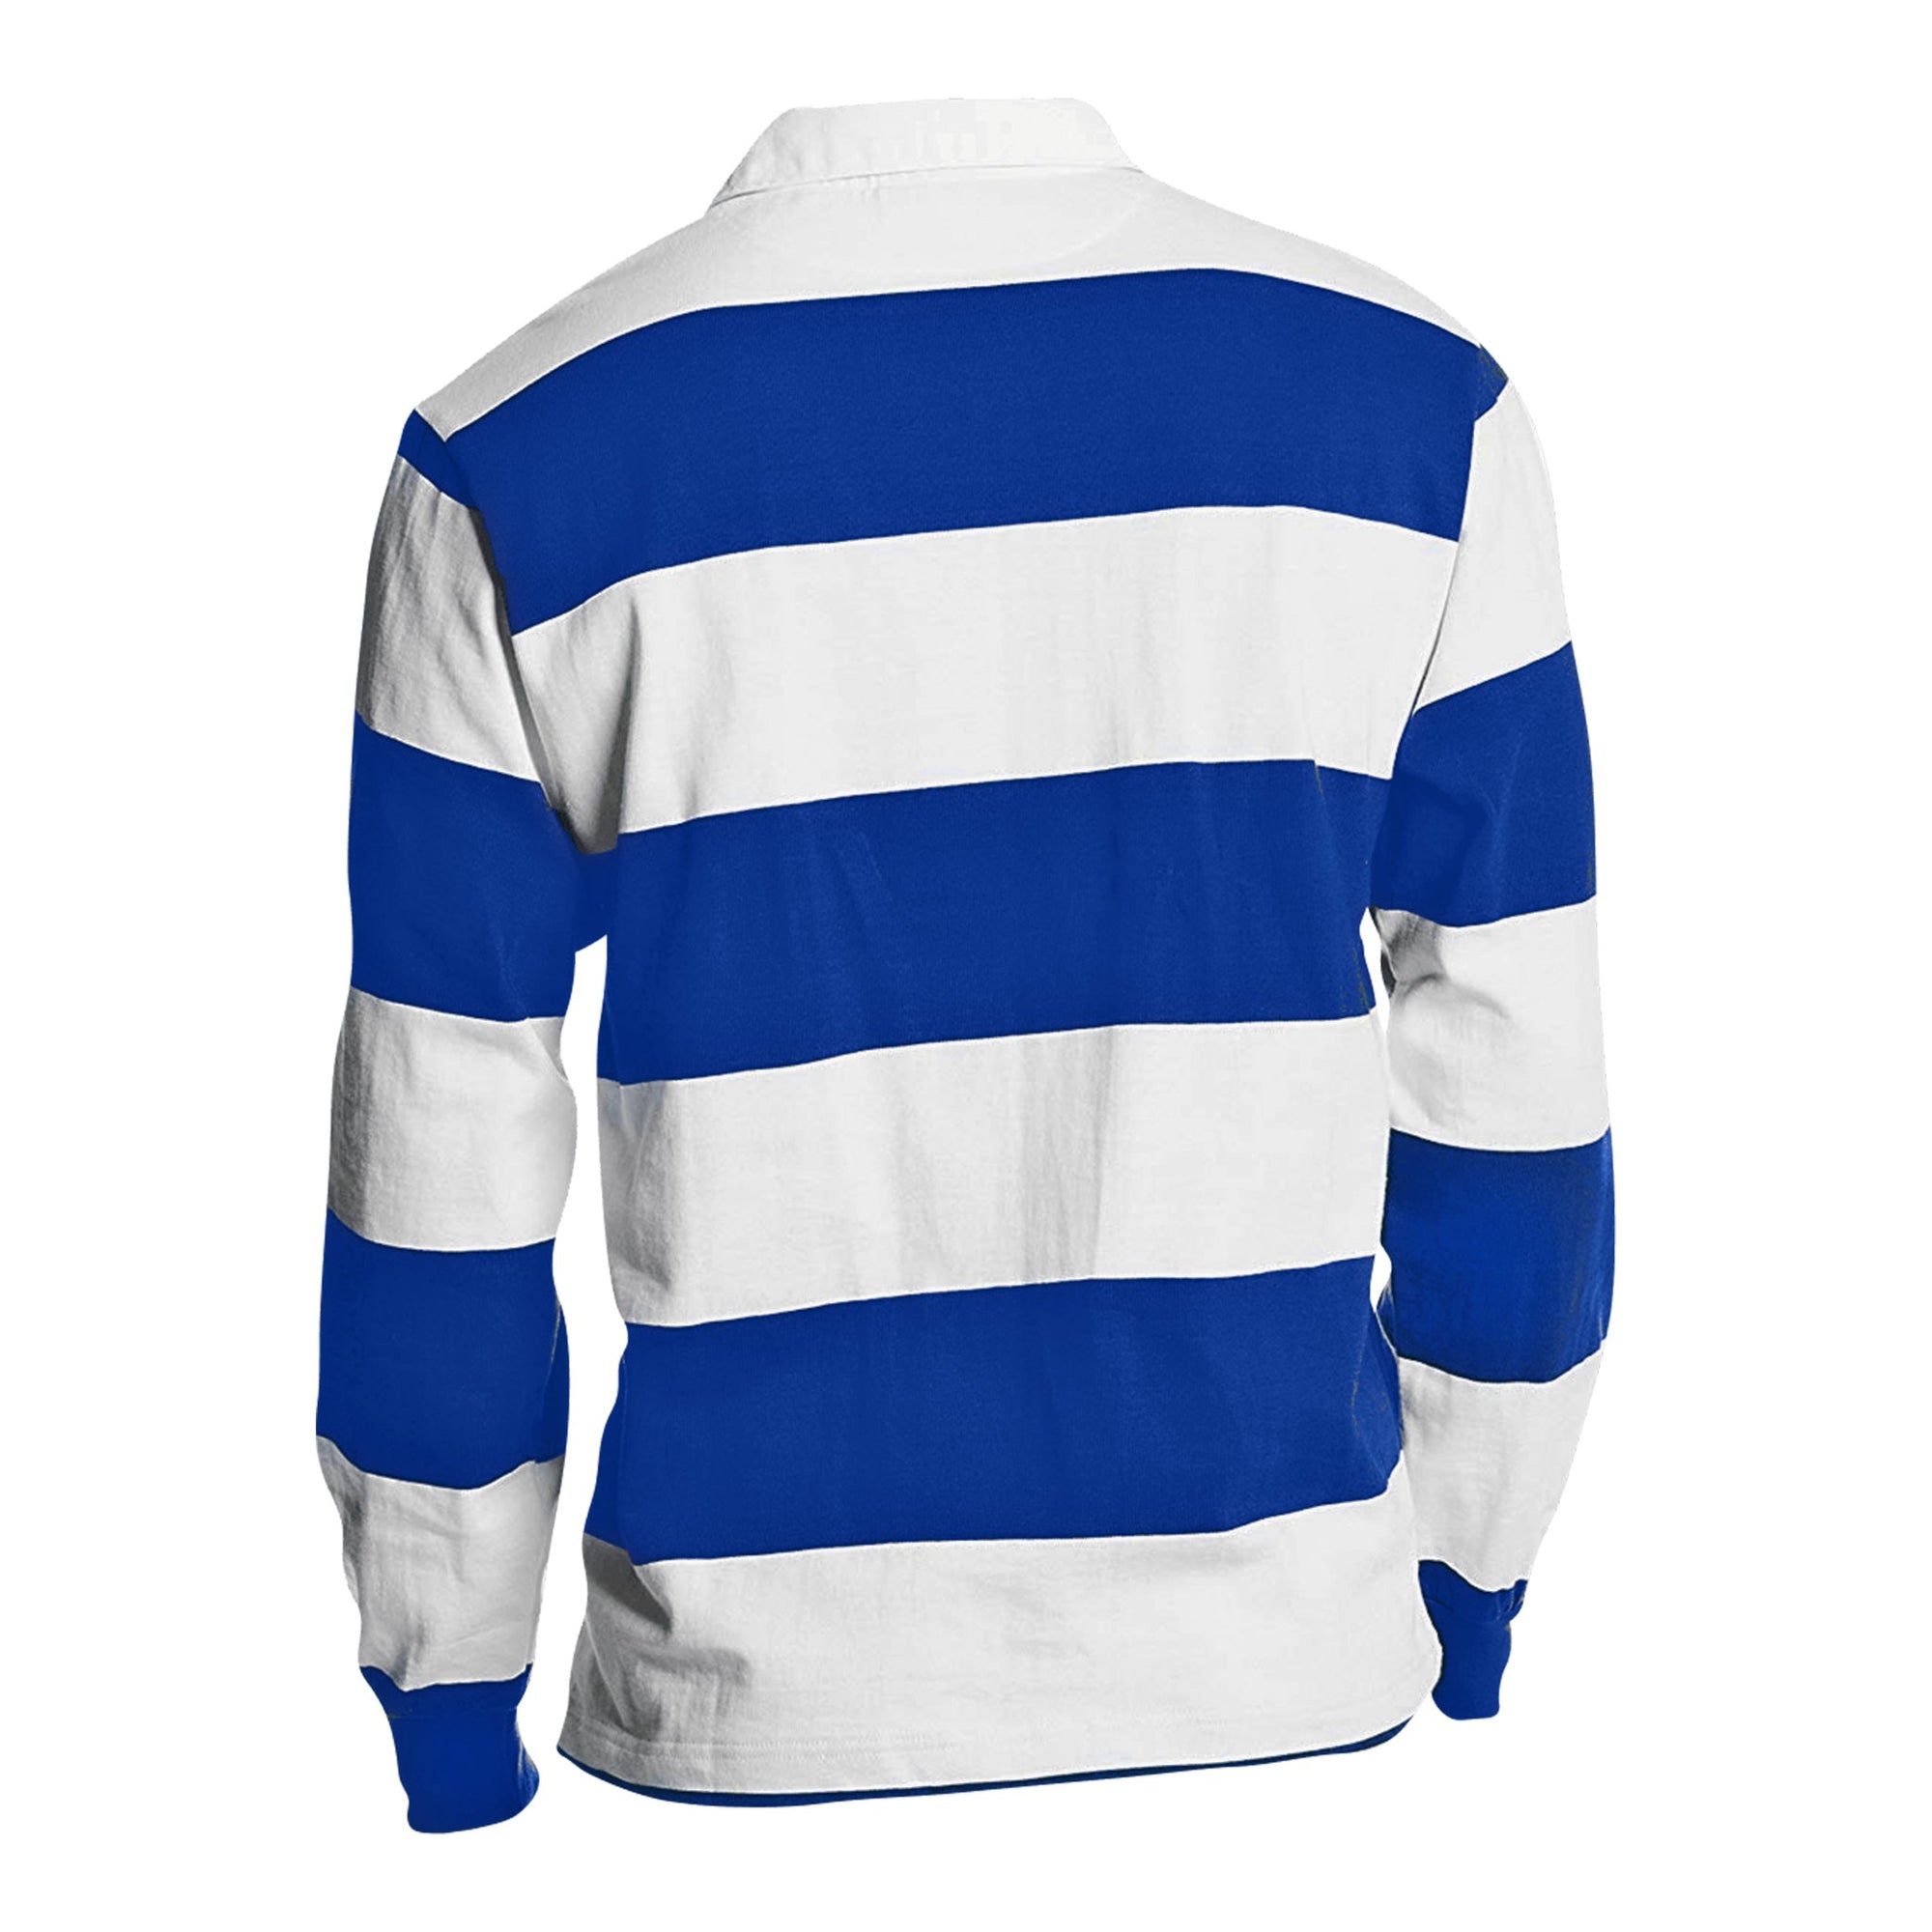 Rugby Imports Wheaton Cotton Social Rugby Jersey